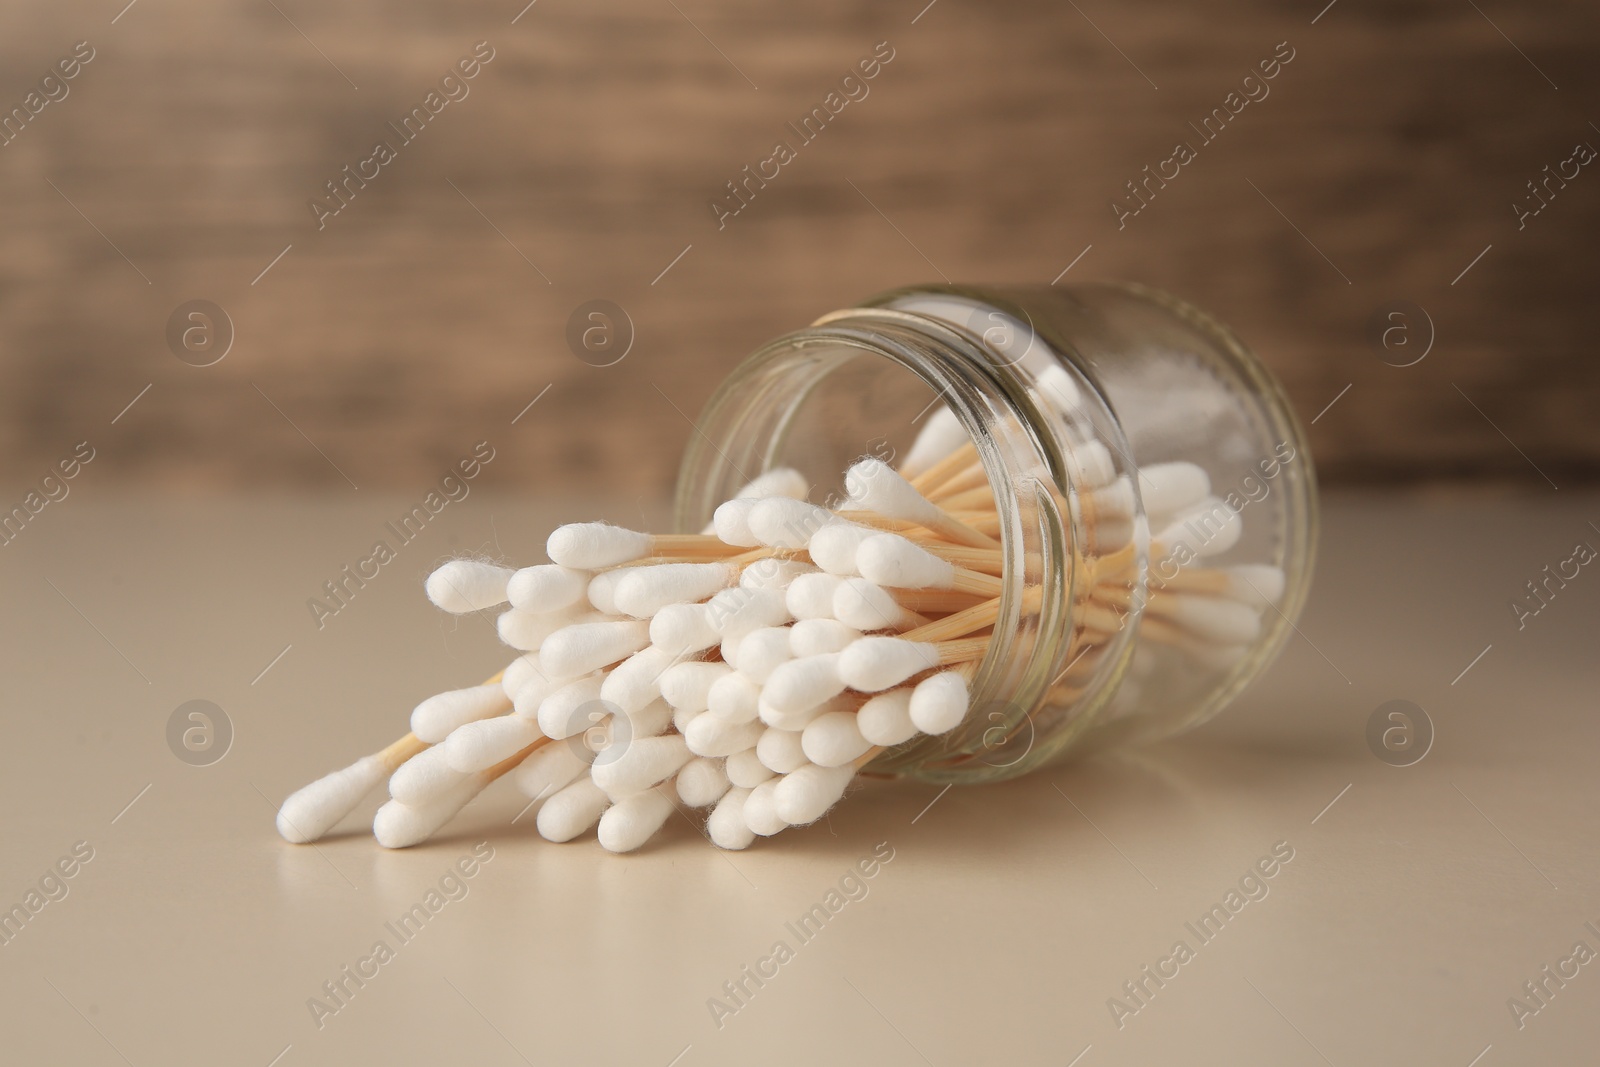 Photo of Jar and clean cotton buds on beige background, closeup